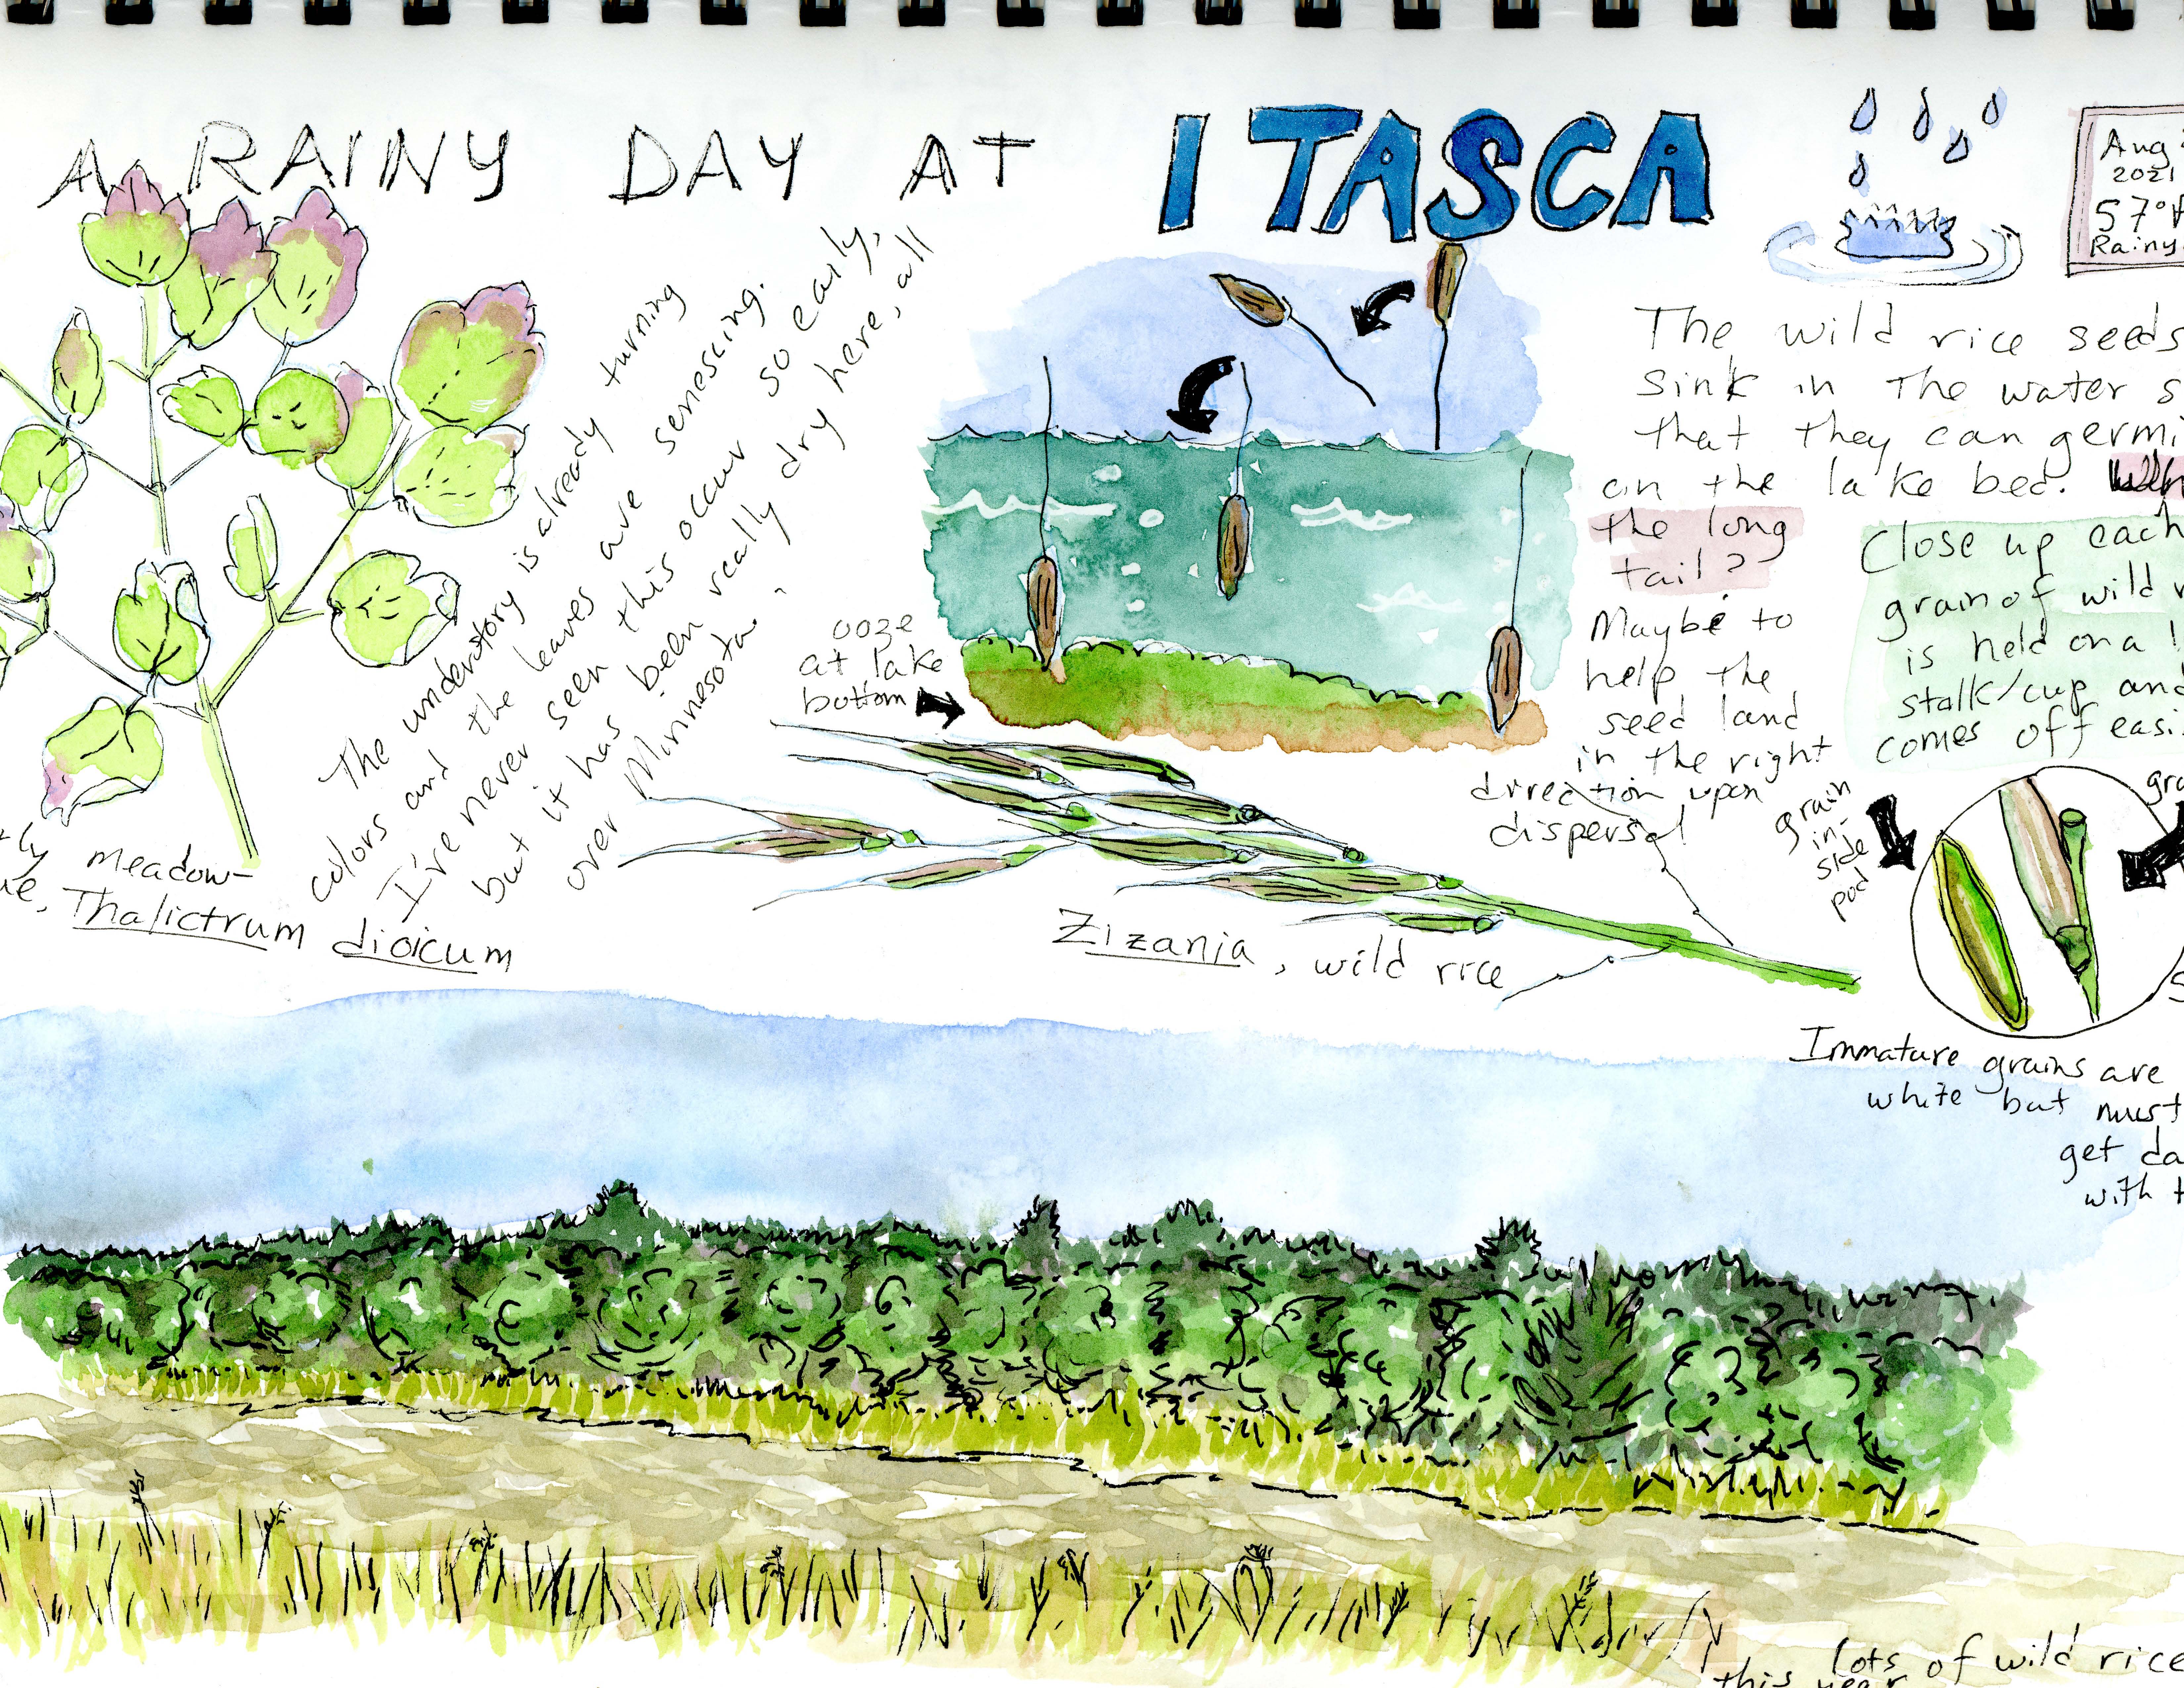 Jennifer Powers' nature journal artwork, titled "A Rainy Day at Itasca"